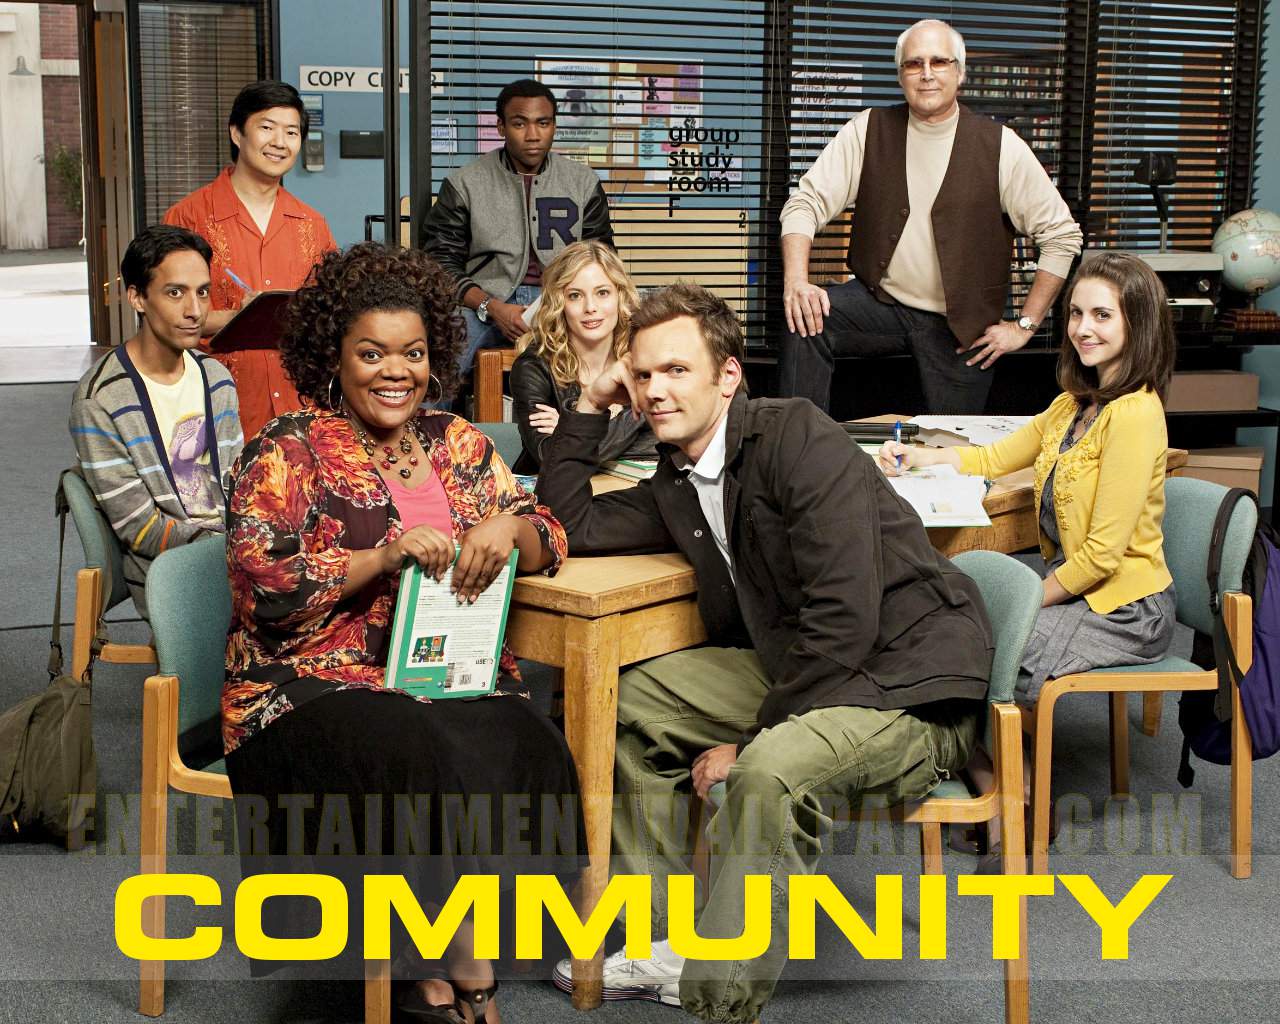 community wallpaper,social group,people,youth,community,event